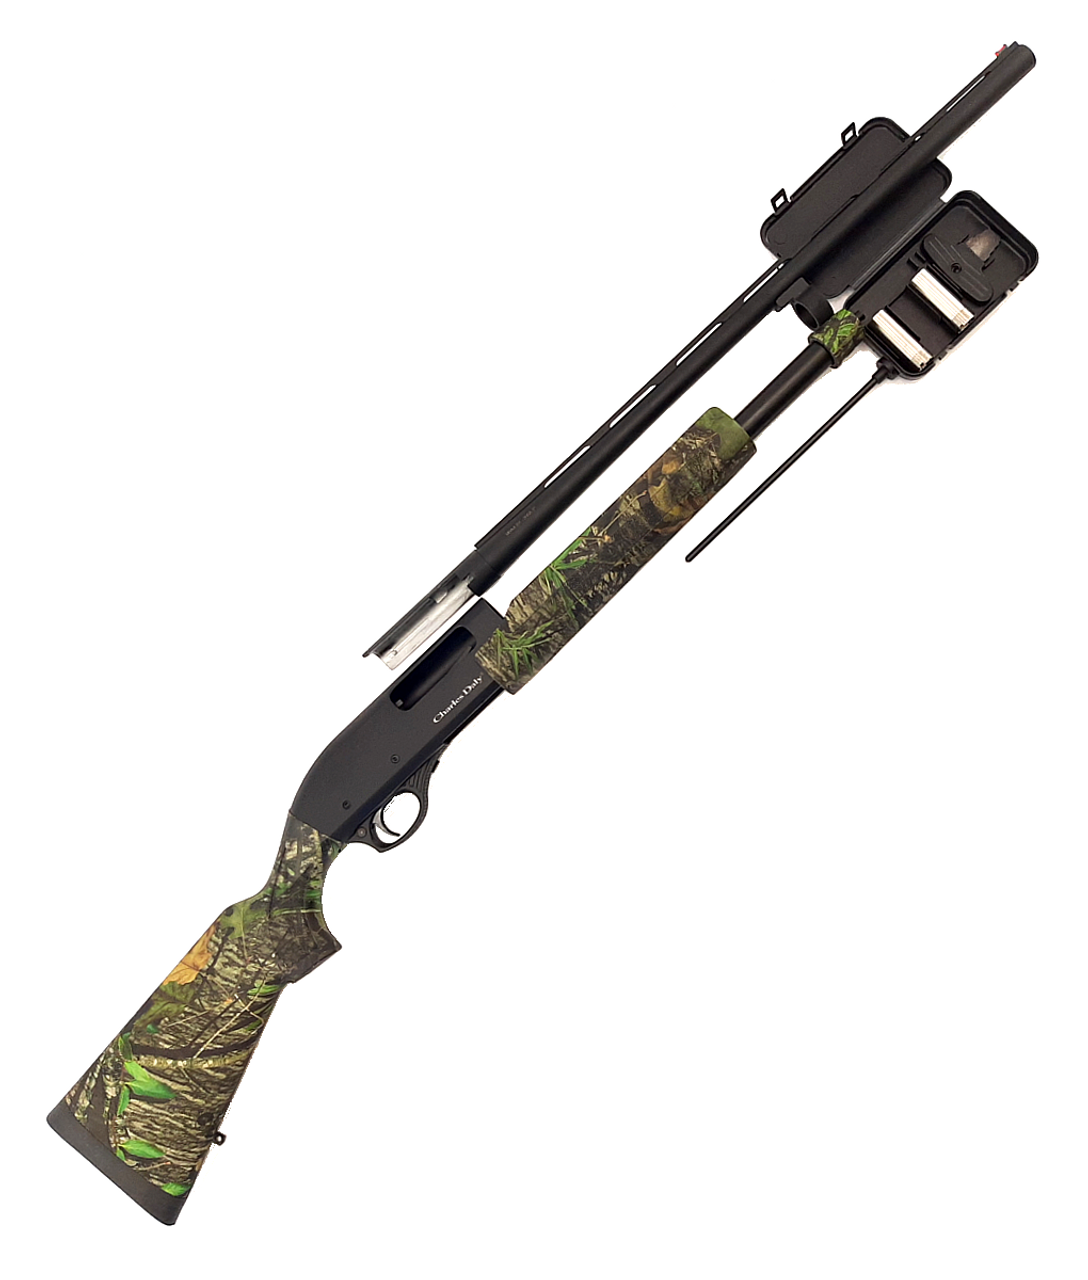 Charles Daly 301 20 Gauge Mossy Oak & Black Field Pump Action Shotgun 930.225
Feature & Specifications
SKU:	930.225
UPC:	8053800941334
Type of Gun:	Shotgun
Caliber:	20GA-3″
Action:	Pump-Action
Barrel Length:	22″ (559 mm)
Chokes:	Beretta/Benelli® Mobil Choke Thread MC-3 (IC,M,F)
Capacity:	4+1
Feed In:	Magazine Tube
Trigger System:	Single
Stock:	Checkered Synthetic
Forend:	Checkered Synthetic
Front Sight:	Fixed Fiber Optic
Safety:	Manual
Weight:	6 lbs
Length:	42.25″
Material:	Aluminum, Steel Barrel
Finish:	Mossy Oak Obsession®
Extraction:	Automatic